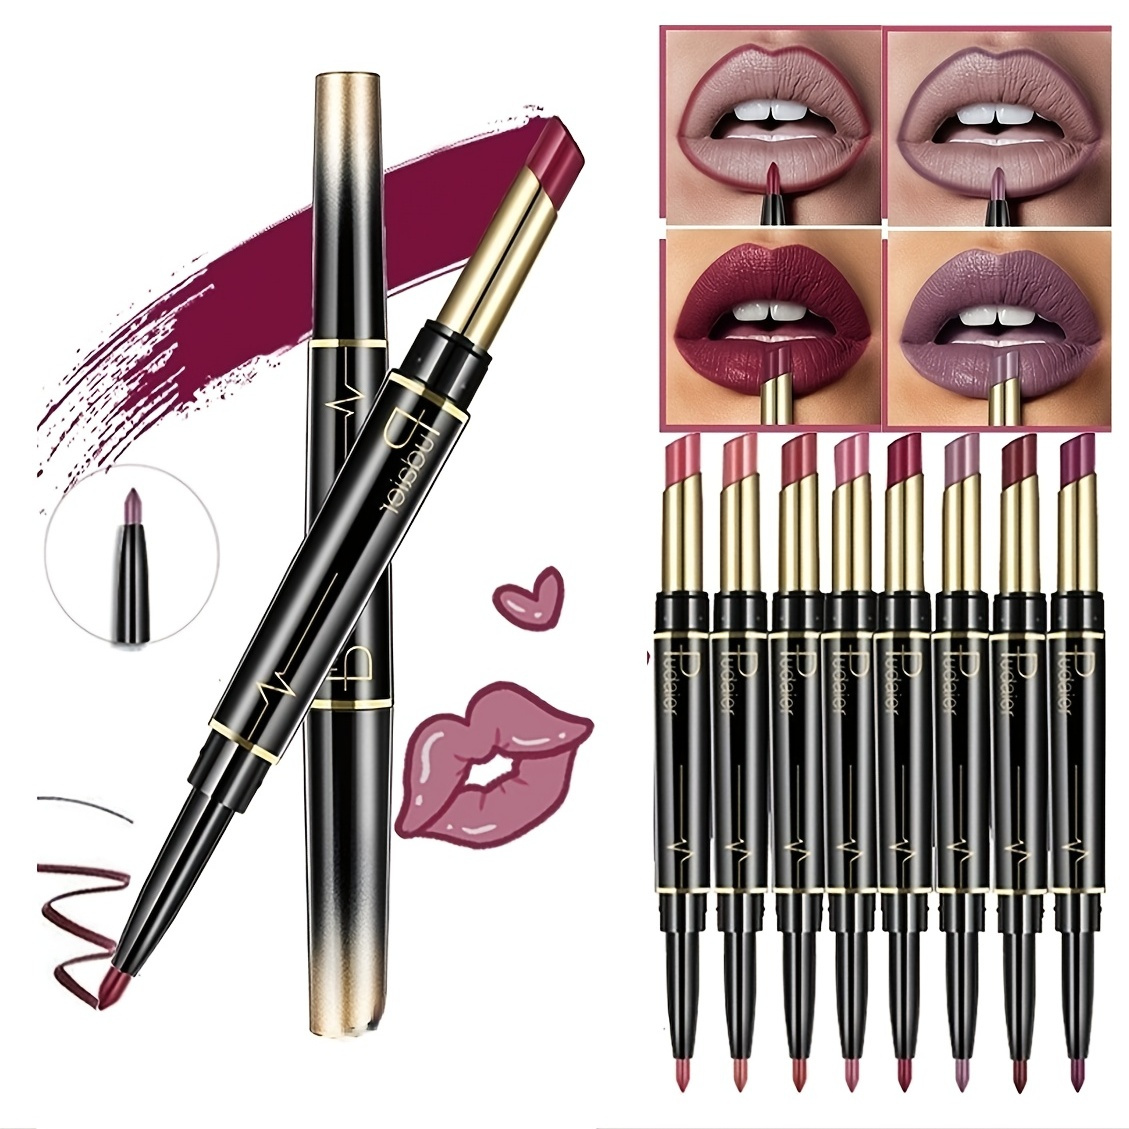 

16 Color Matte Lip Liner And Lipstick , Double Ended Lip Pen Nude Makeup Tool , Long Lasting Color Rendering, Waterproof Lip Cosmetics